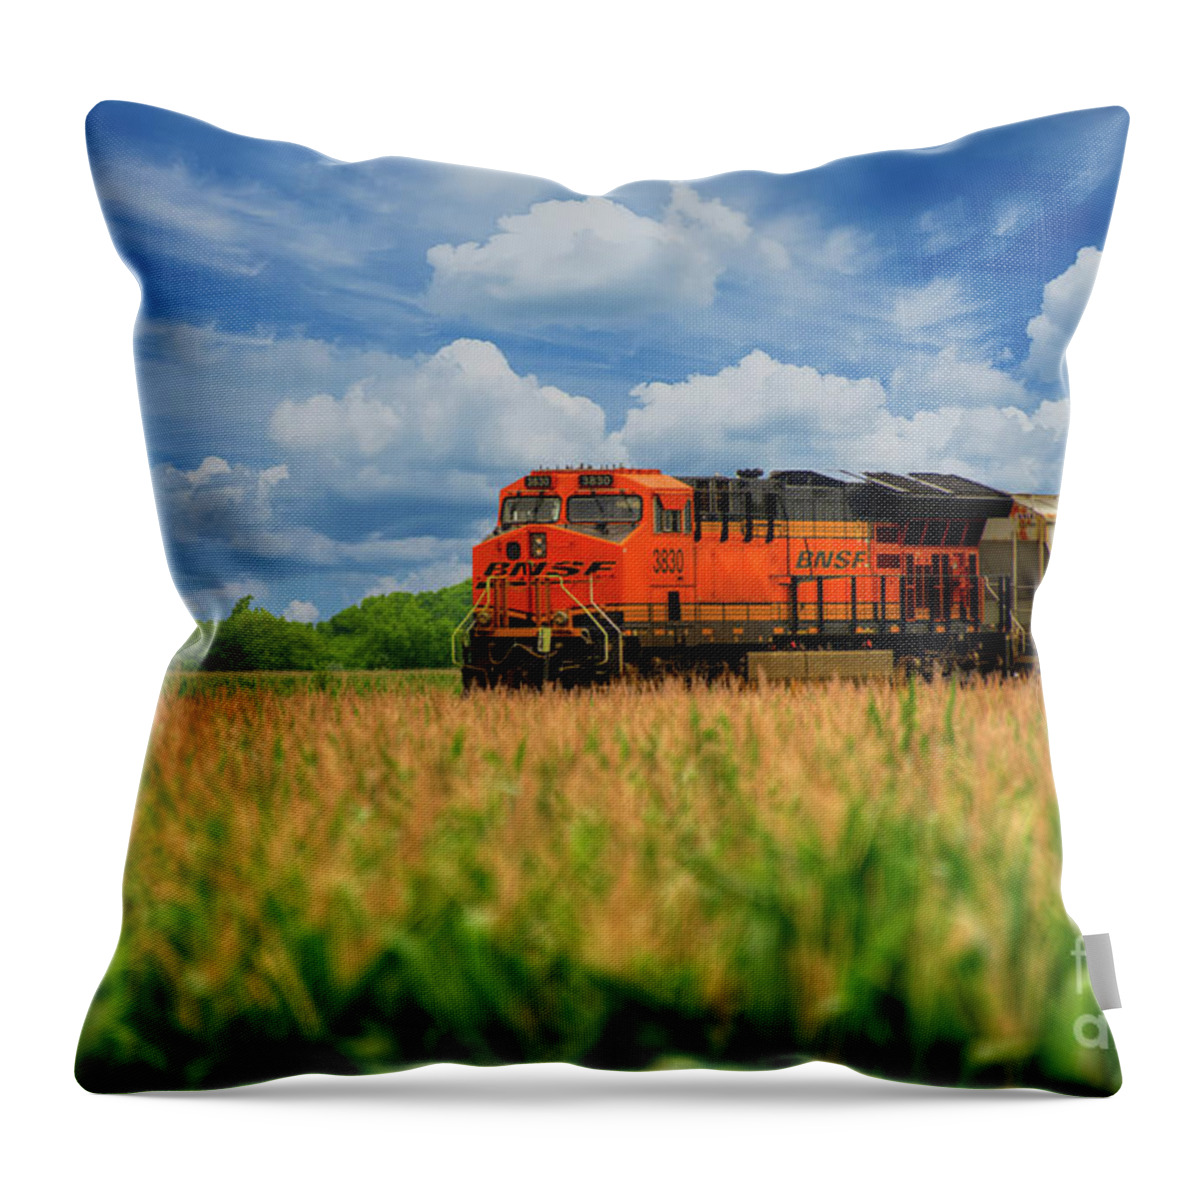 Freight Train Throw Pillow featuring the photograph Freight Train by Kelly Wade